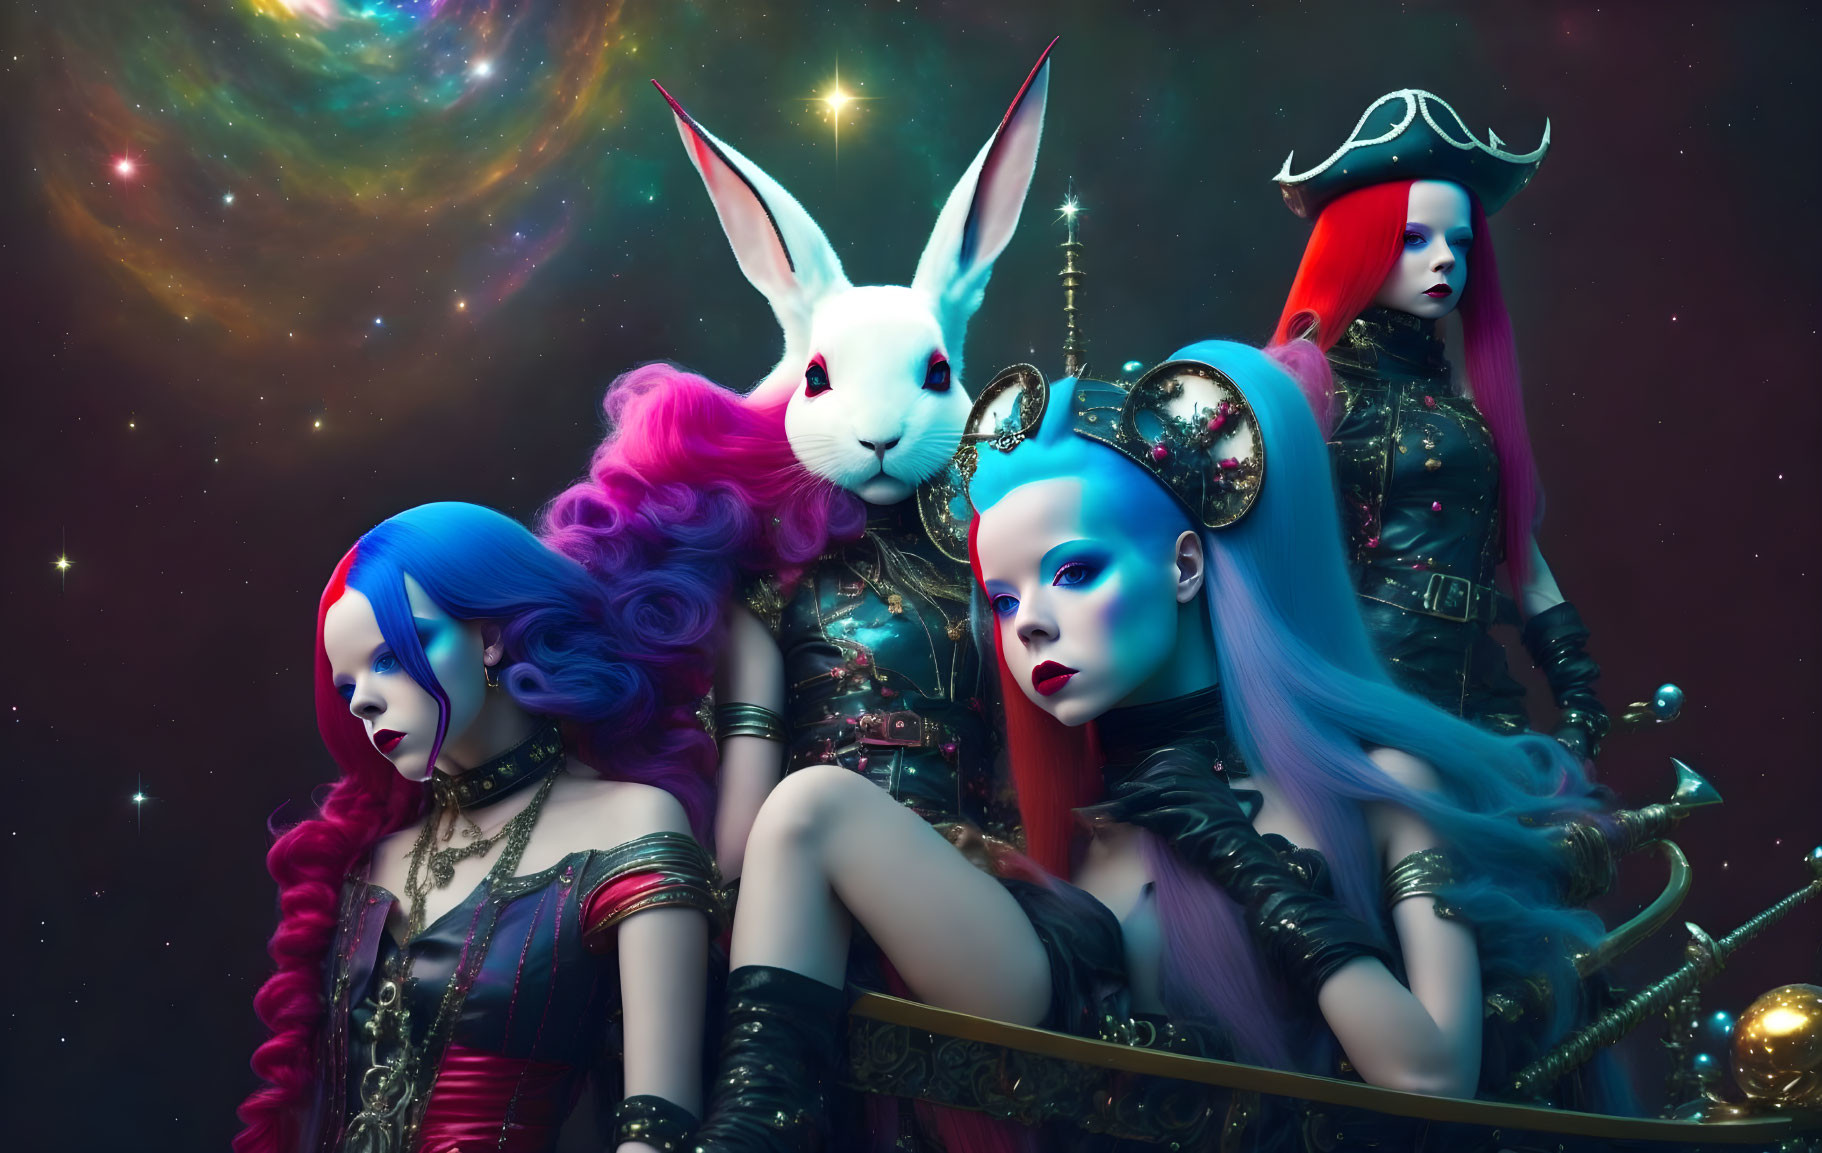 Fantasy-themed art with humanoid figures, vibrant hair, styled costumes, and a white rabbit in cosmic